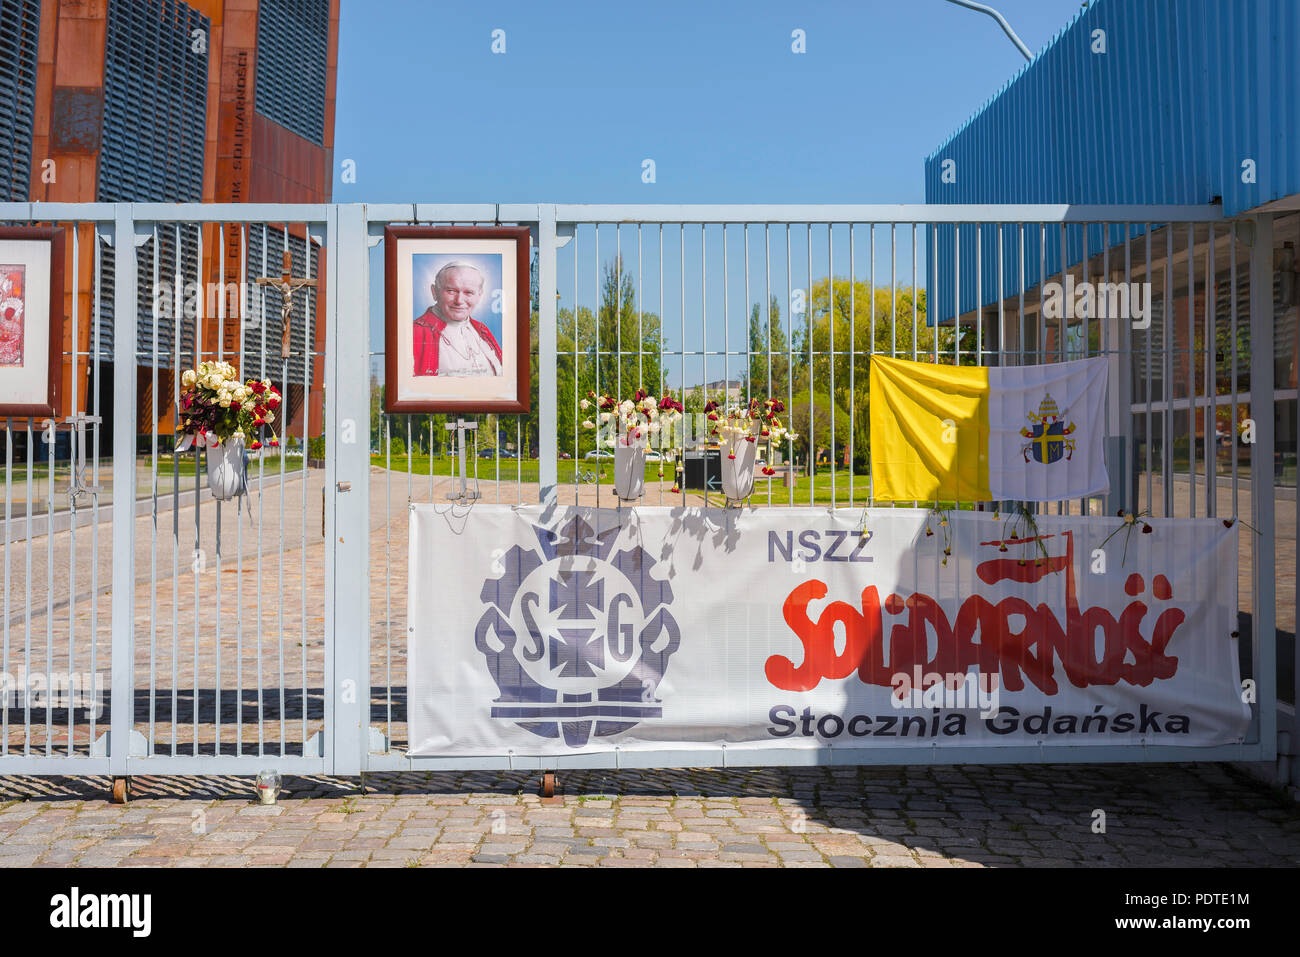 Shipyard gate Gdansk, view of the historic Number 2 Gate of the Gdansk shipyard, site of the Solidarity Movement strikes in the early 1980s, Poland. Stock Photo